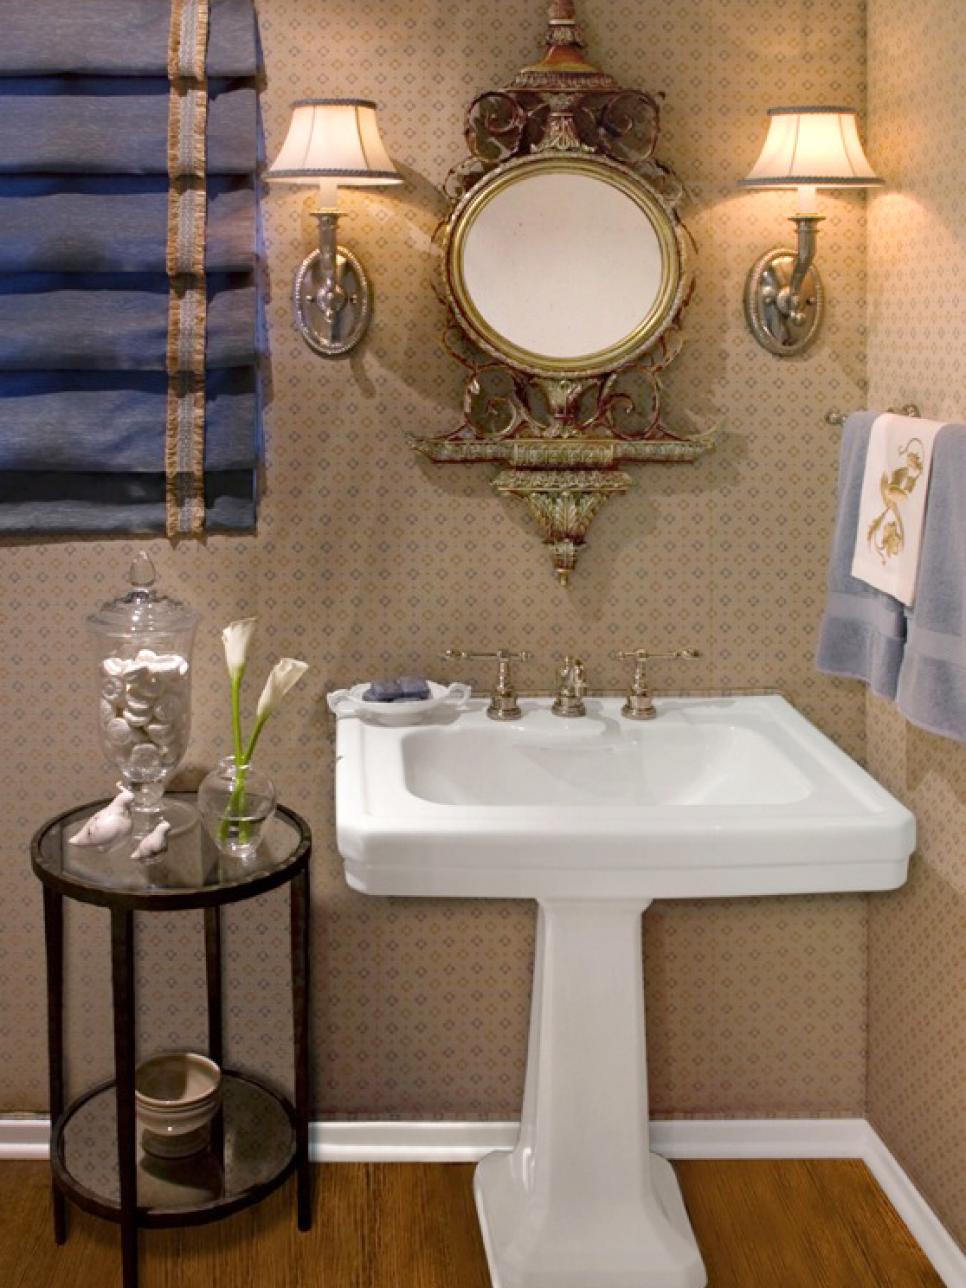 Elegant, Old-World Bathroom With Charming Vintage Accents